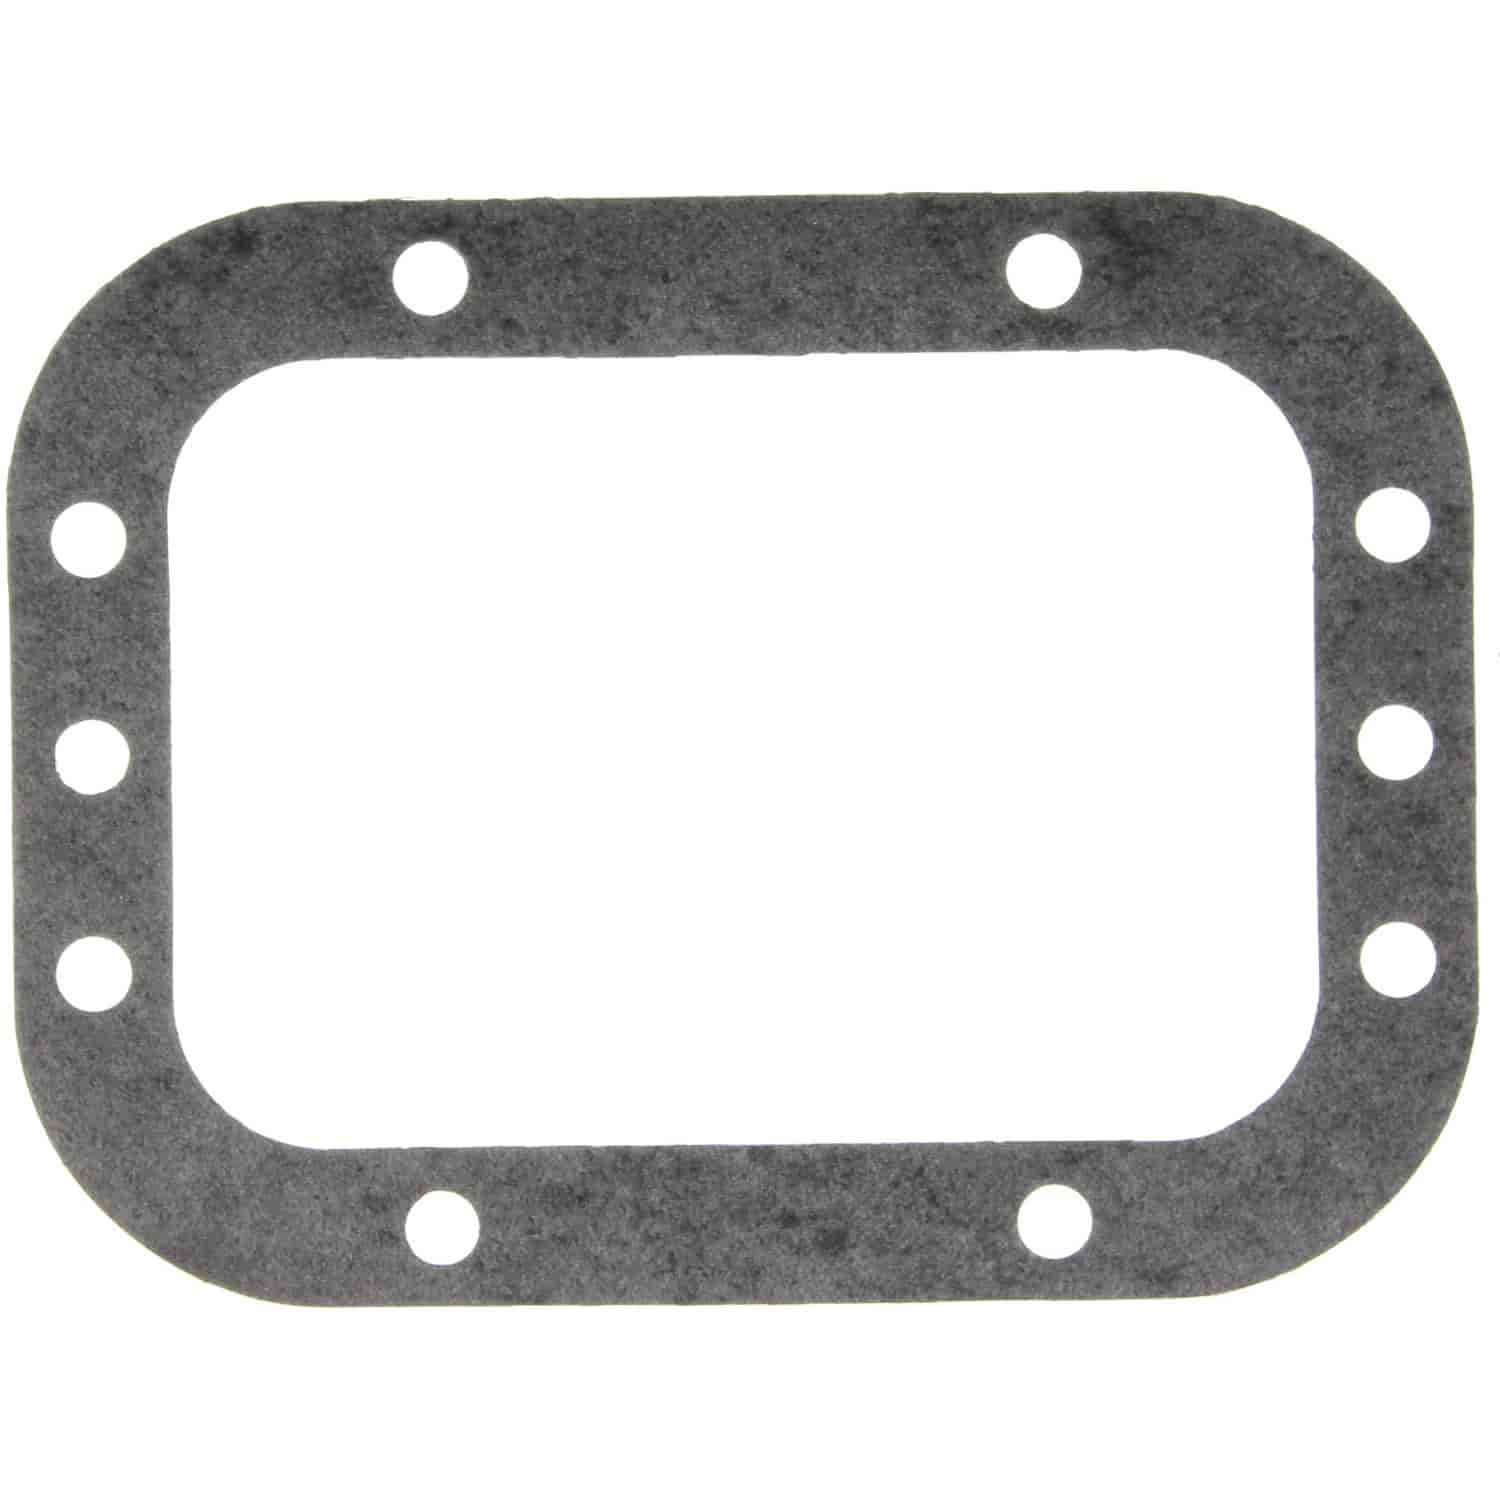 Cylinder Block Hand Hole Cover All 8 Bolt